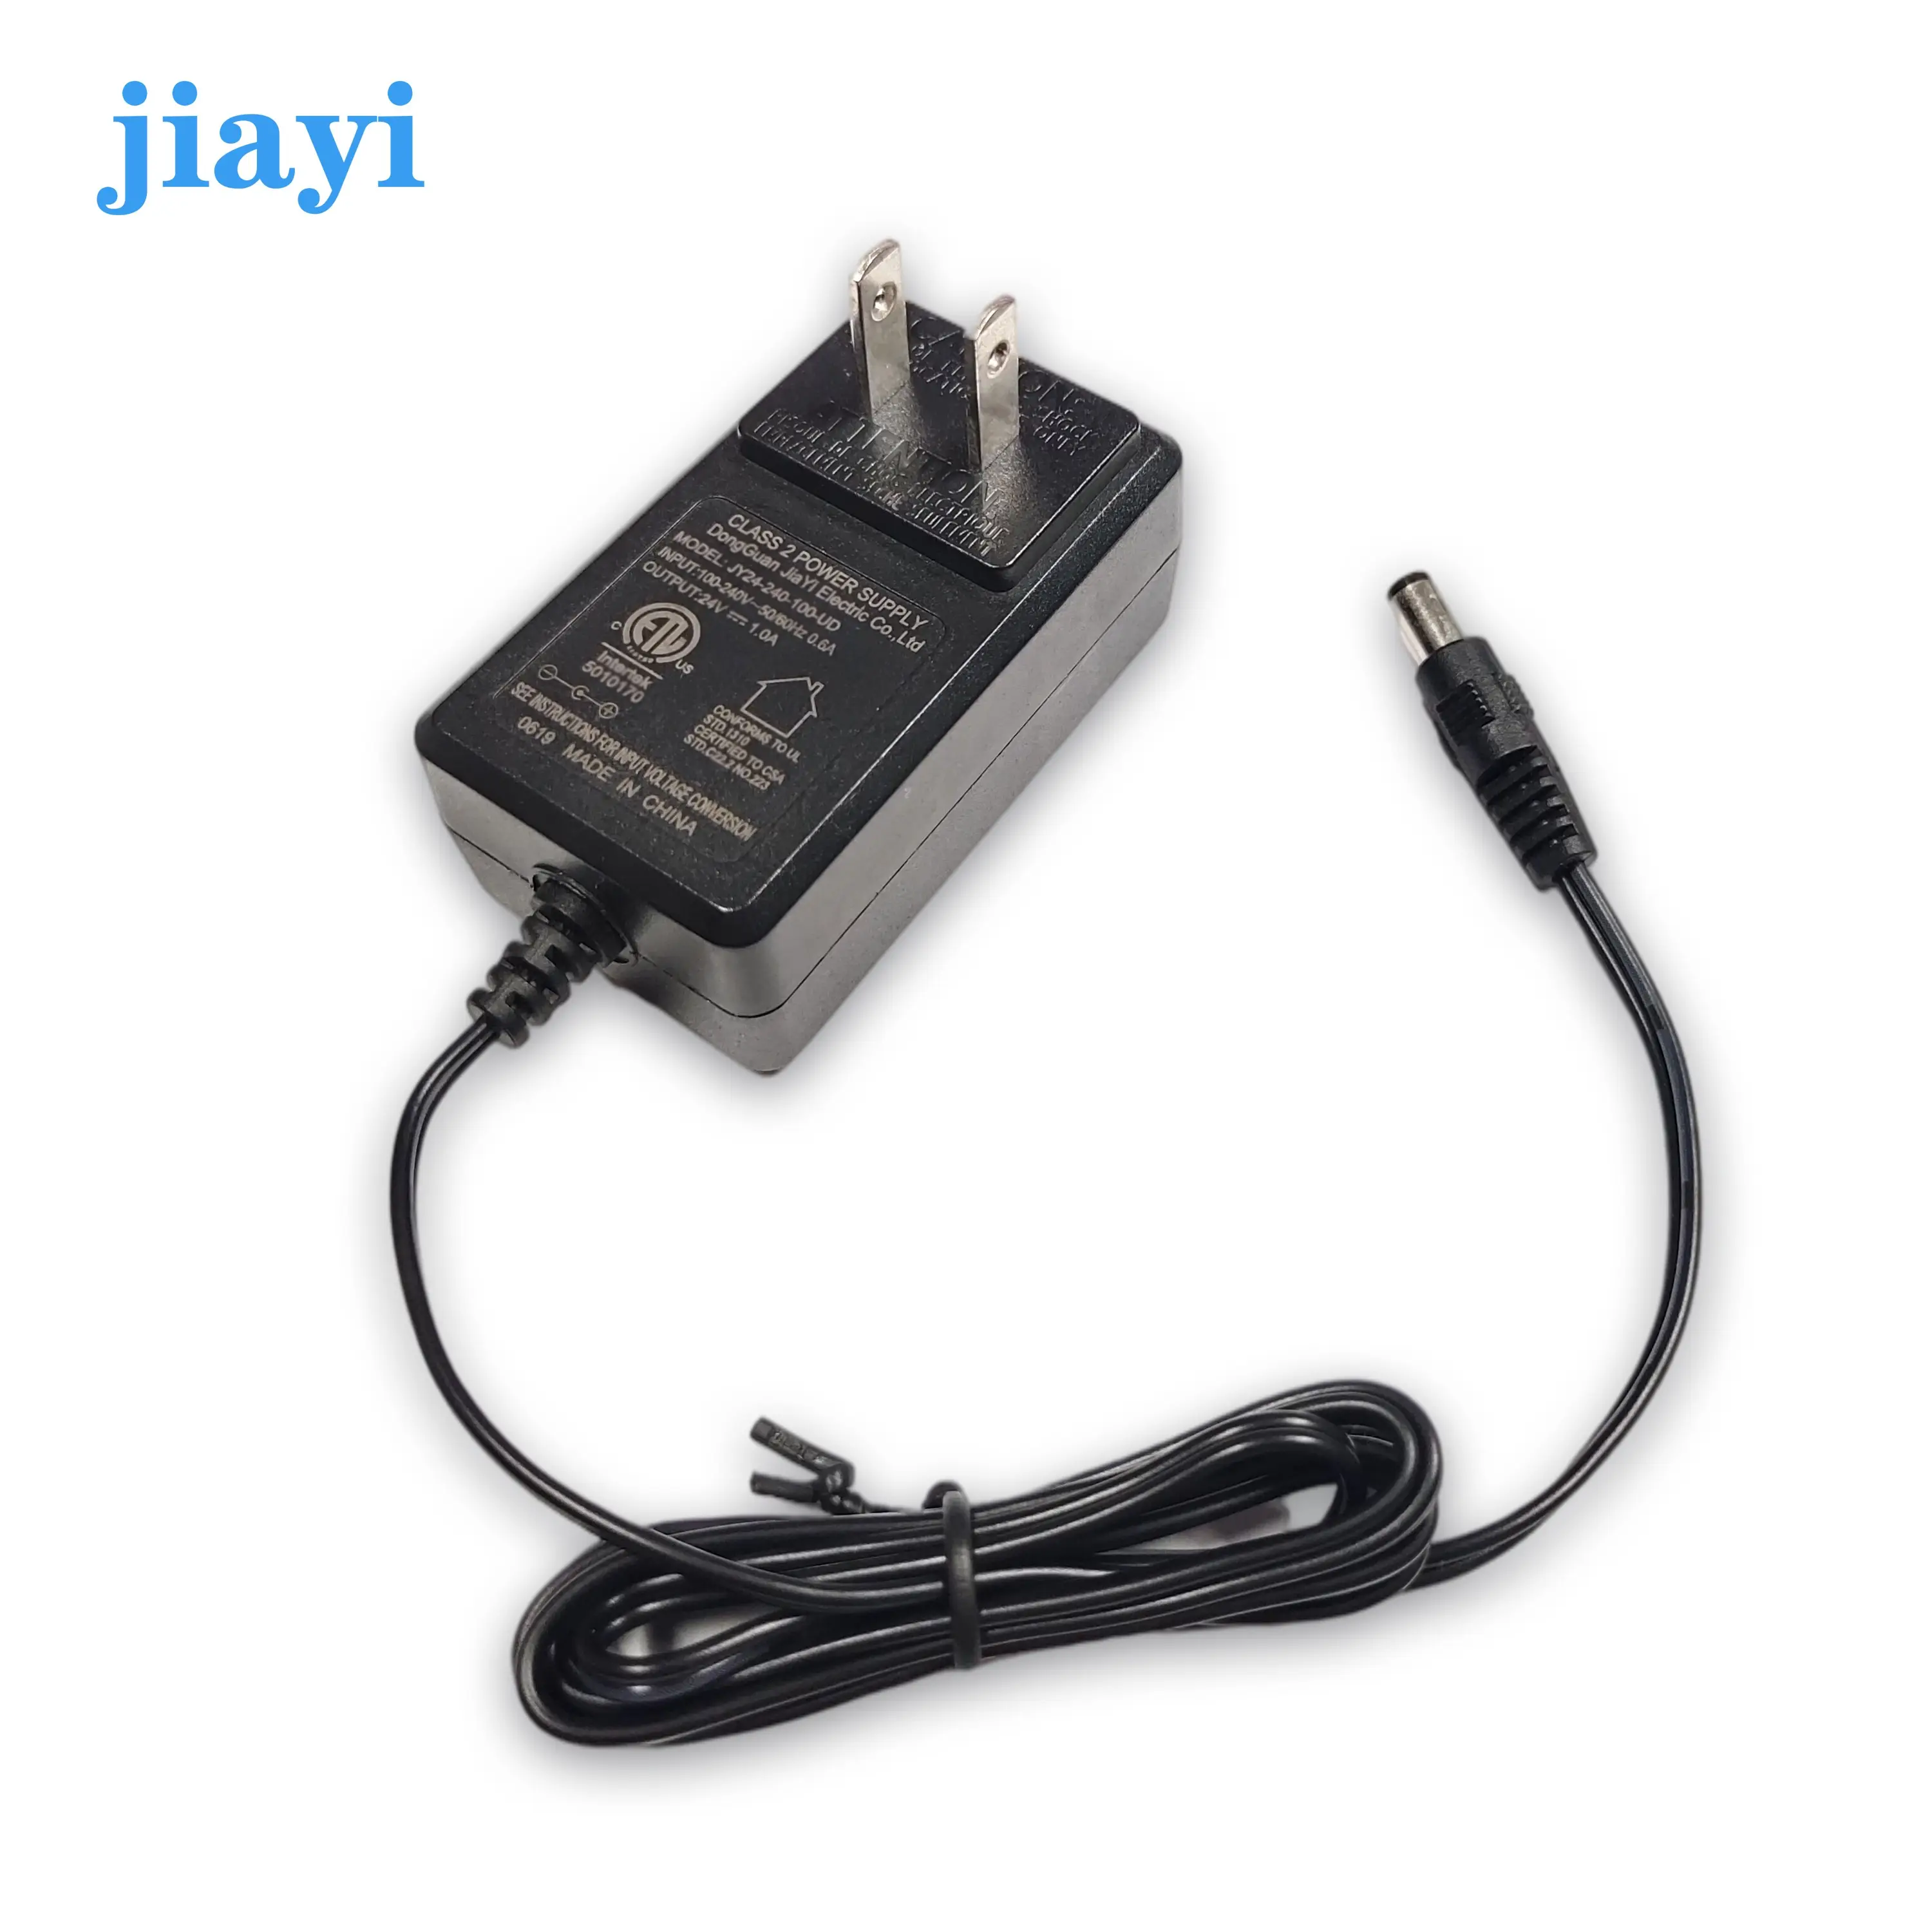 5v 9v 12v 15v 24V 1a 1.5a 2a 2.5a 3a ETL FCC PSE Power Adaptor 24W Home Appliance Ac Dc Black White Switching Power Adapter